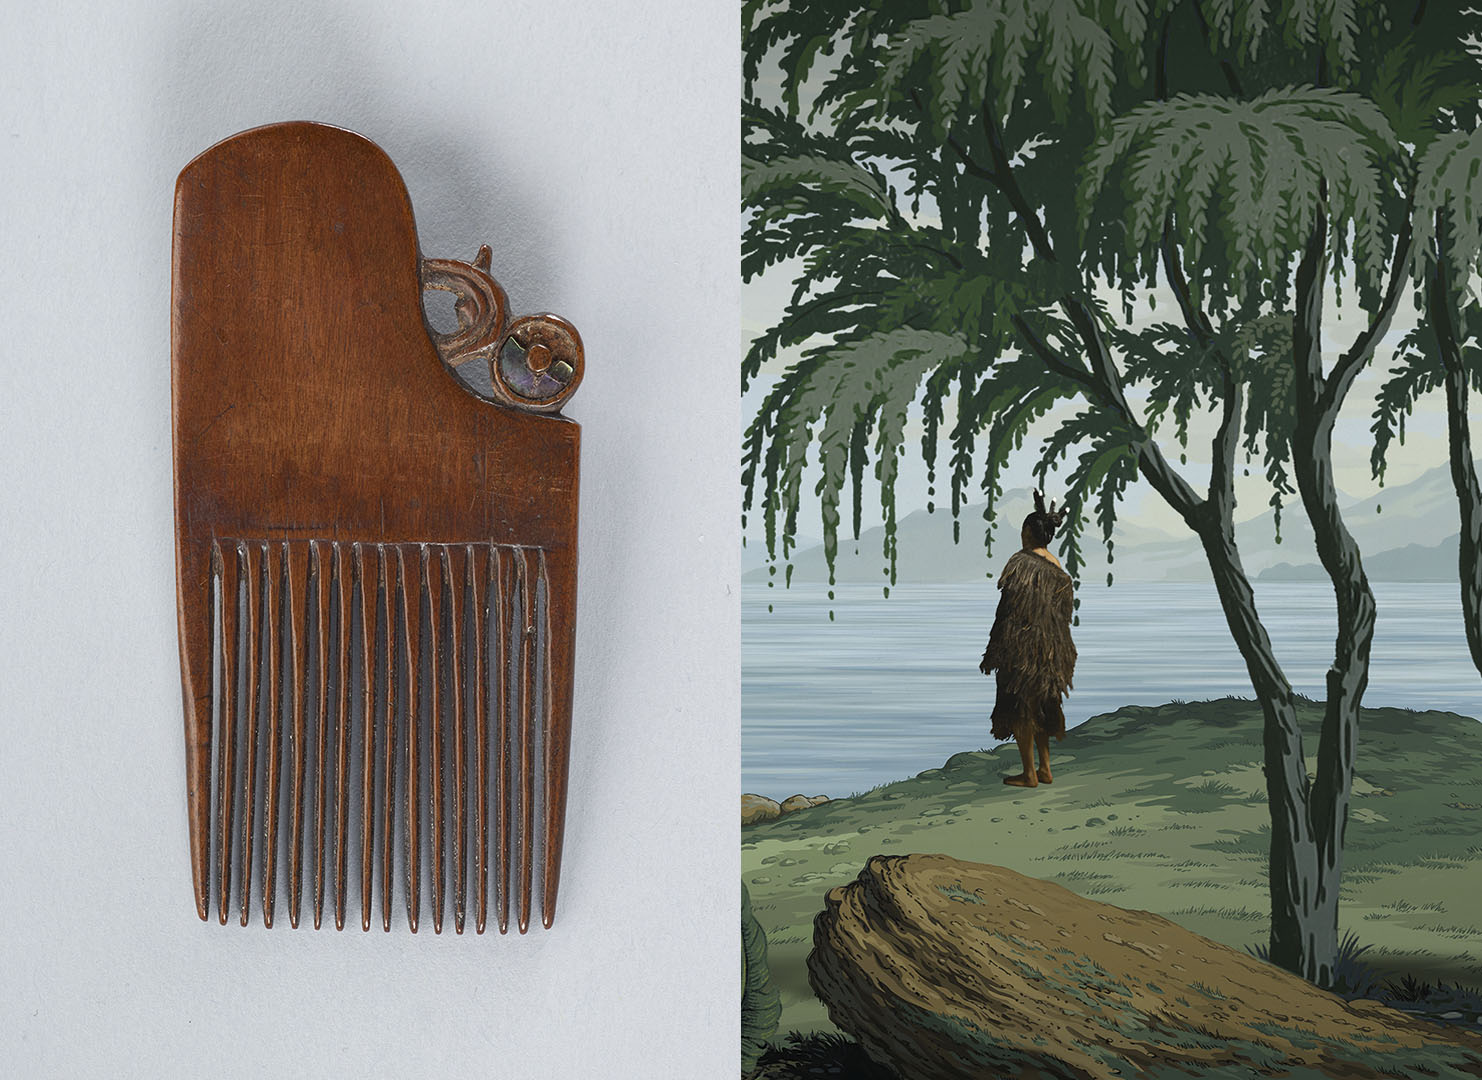 A man from Lisa Reihana's work has a comb in his hair - on the left is a similar comb from Te Papa's collections